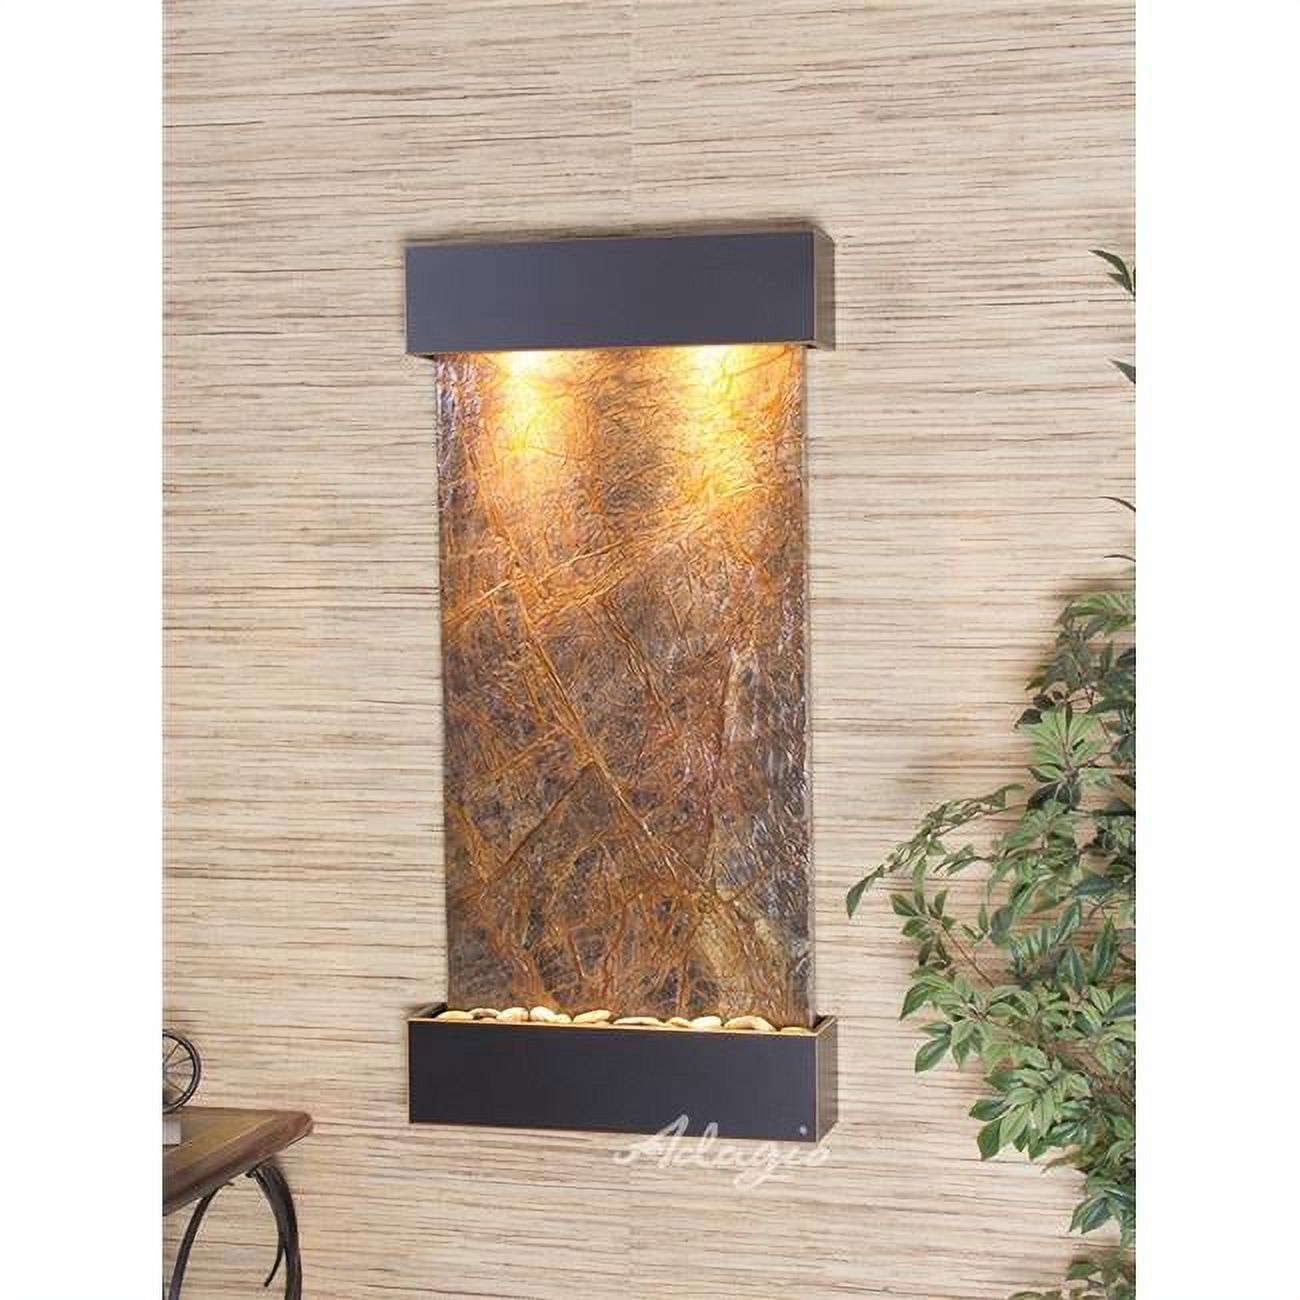 Adagio WCS1506 Whispering Creek Blackened Copper Brown Marble Wall Fountain - image 1 of 2